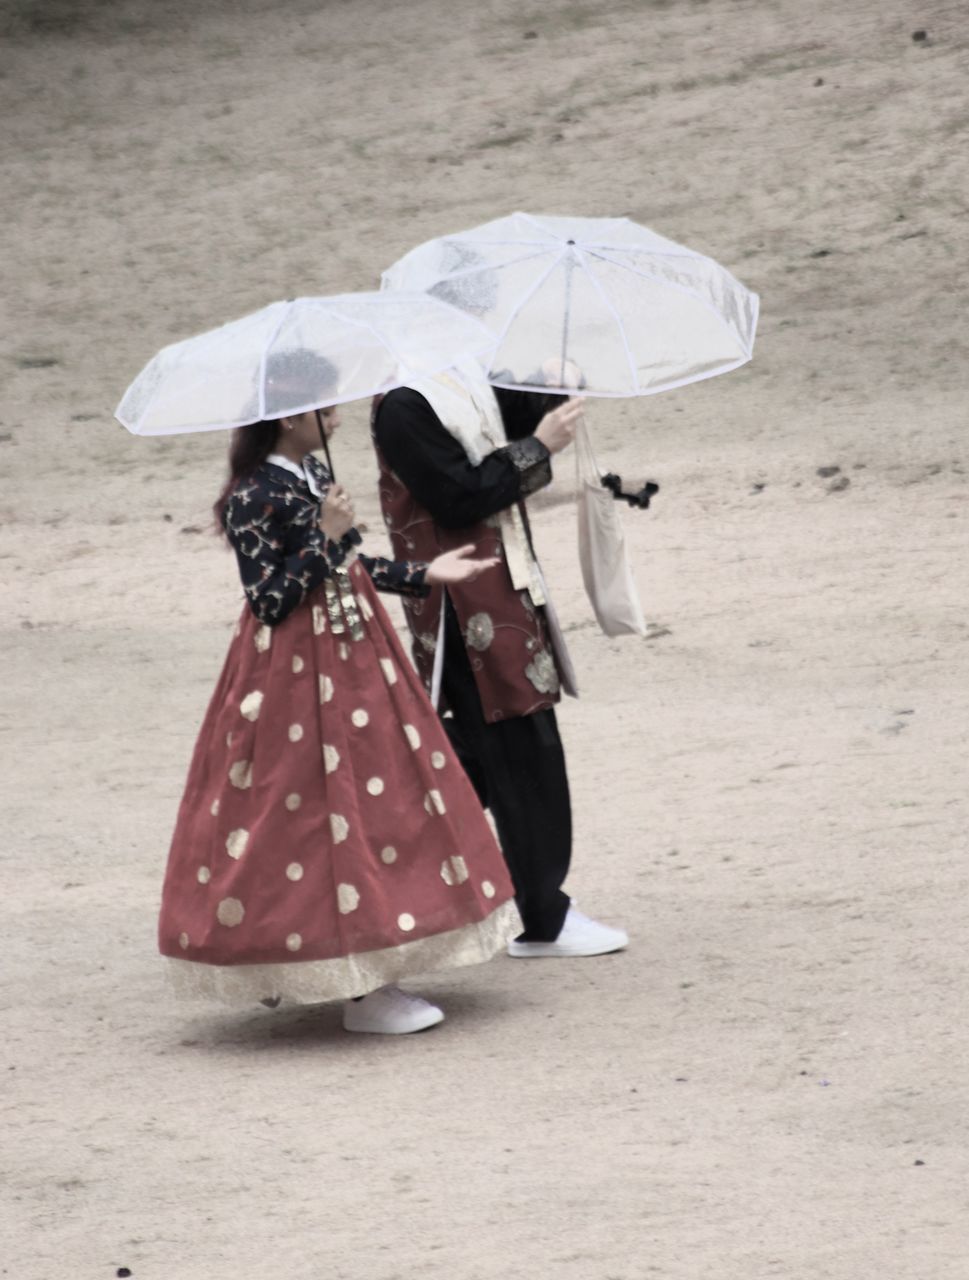 umbrella, protection, adult, women, security, clothing, rain, full length, fashion accessory, nature, land, wet, one person, parasol, holding, day, outdoors, polka dot, walking, female, lifestyles, traditional clothing, leisure activity